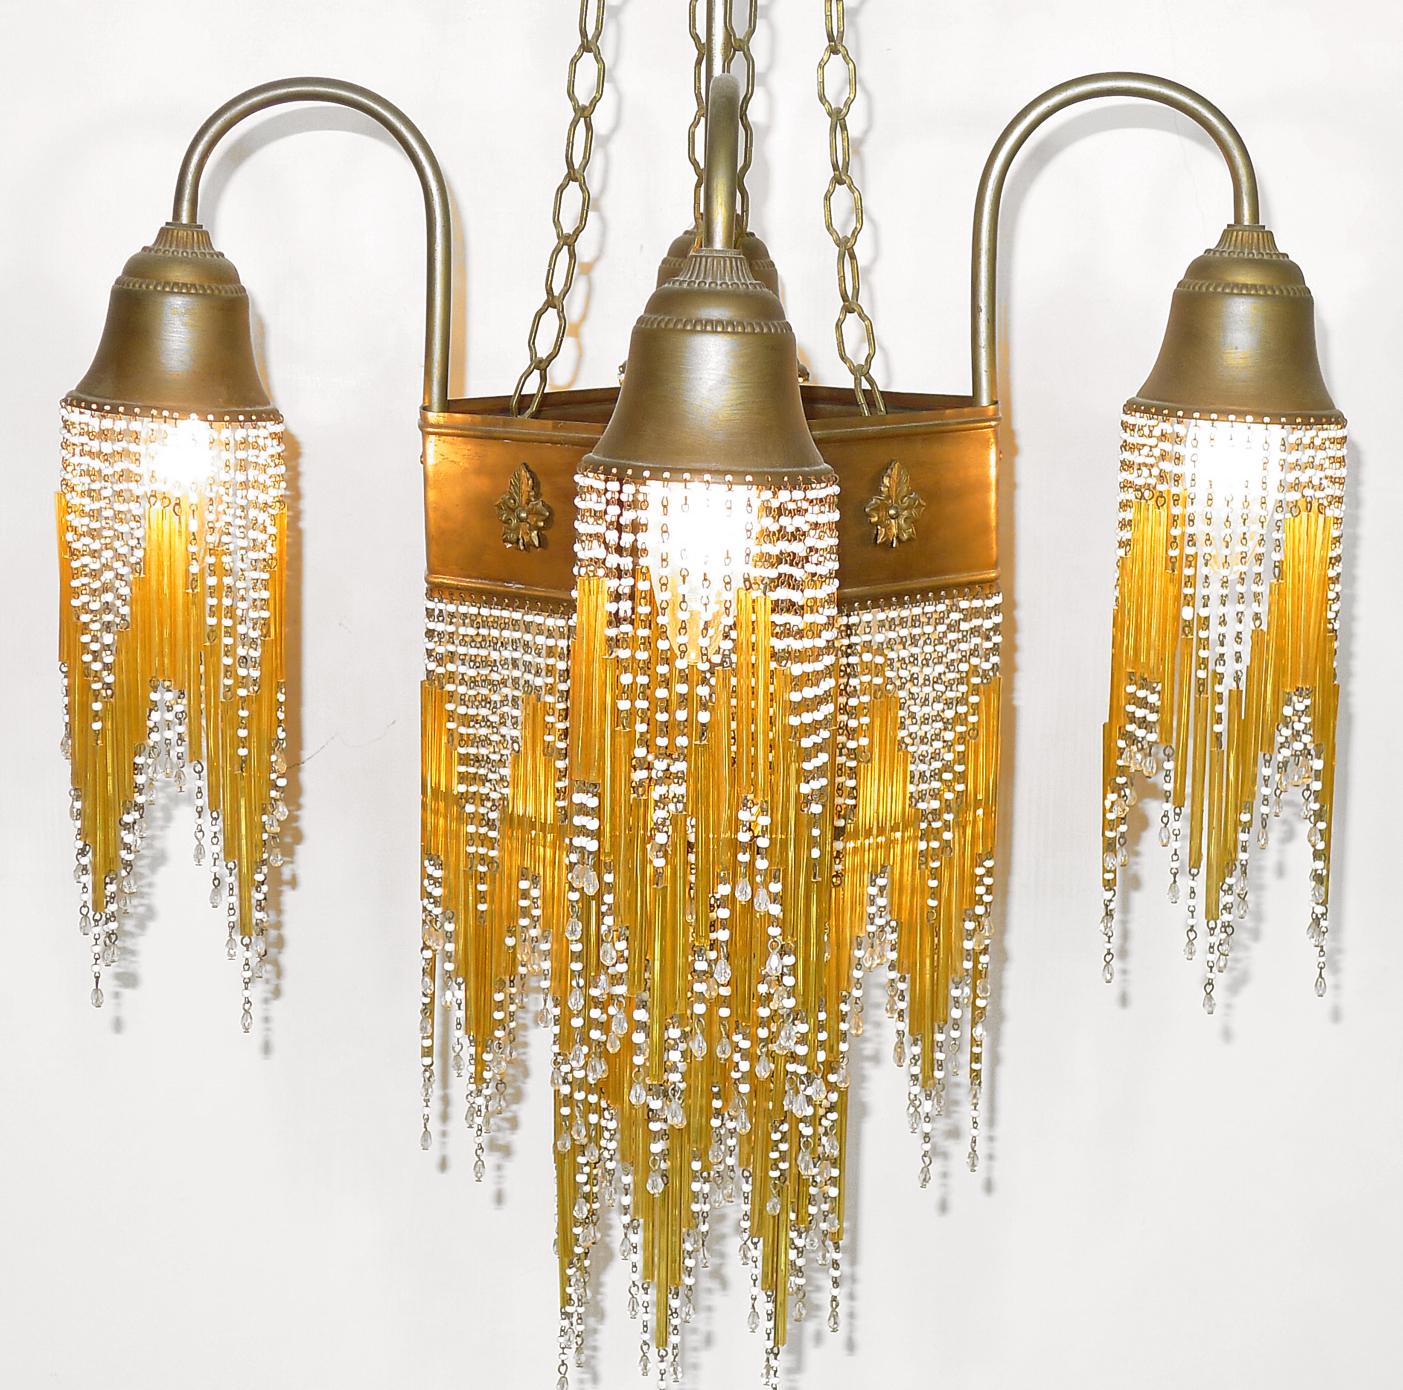 Fabulous midcentury in clear and amber beaded glass Art Deco or Art Nouveau chandelier.
Measures:
Width: 16 in / 40 cm
Diagonal: 20 in / 50 cm
Height: 38 in / 96 cm
Five light bulbs E14/ good working condition/European wiring.
Age patina.